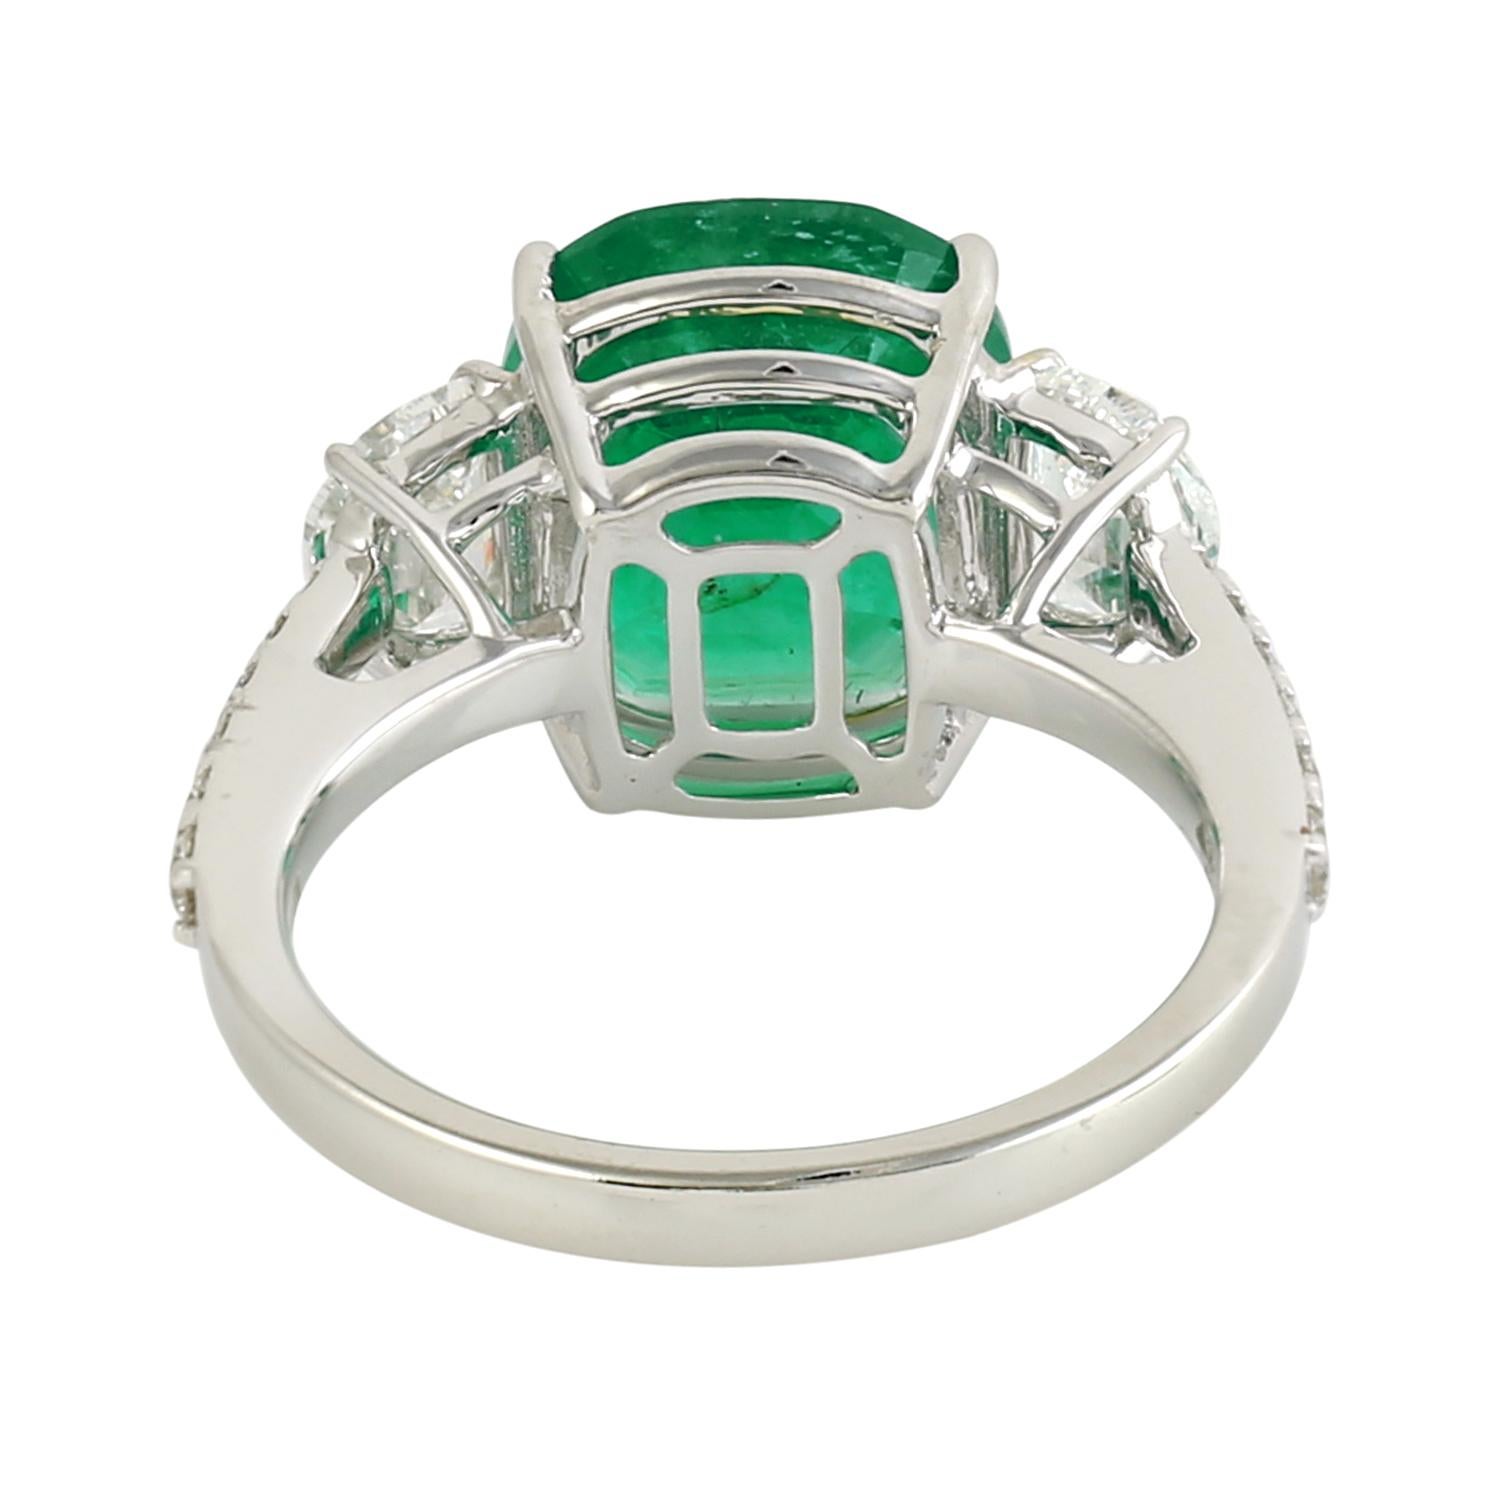 Art Deco Cushion Shaped Zambian Emerald Cocktail Ring With Diamonds For Sale